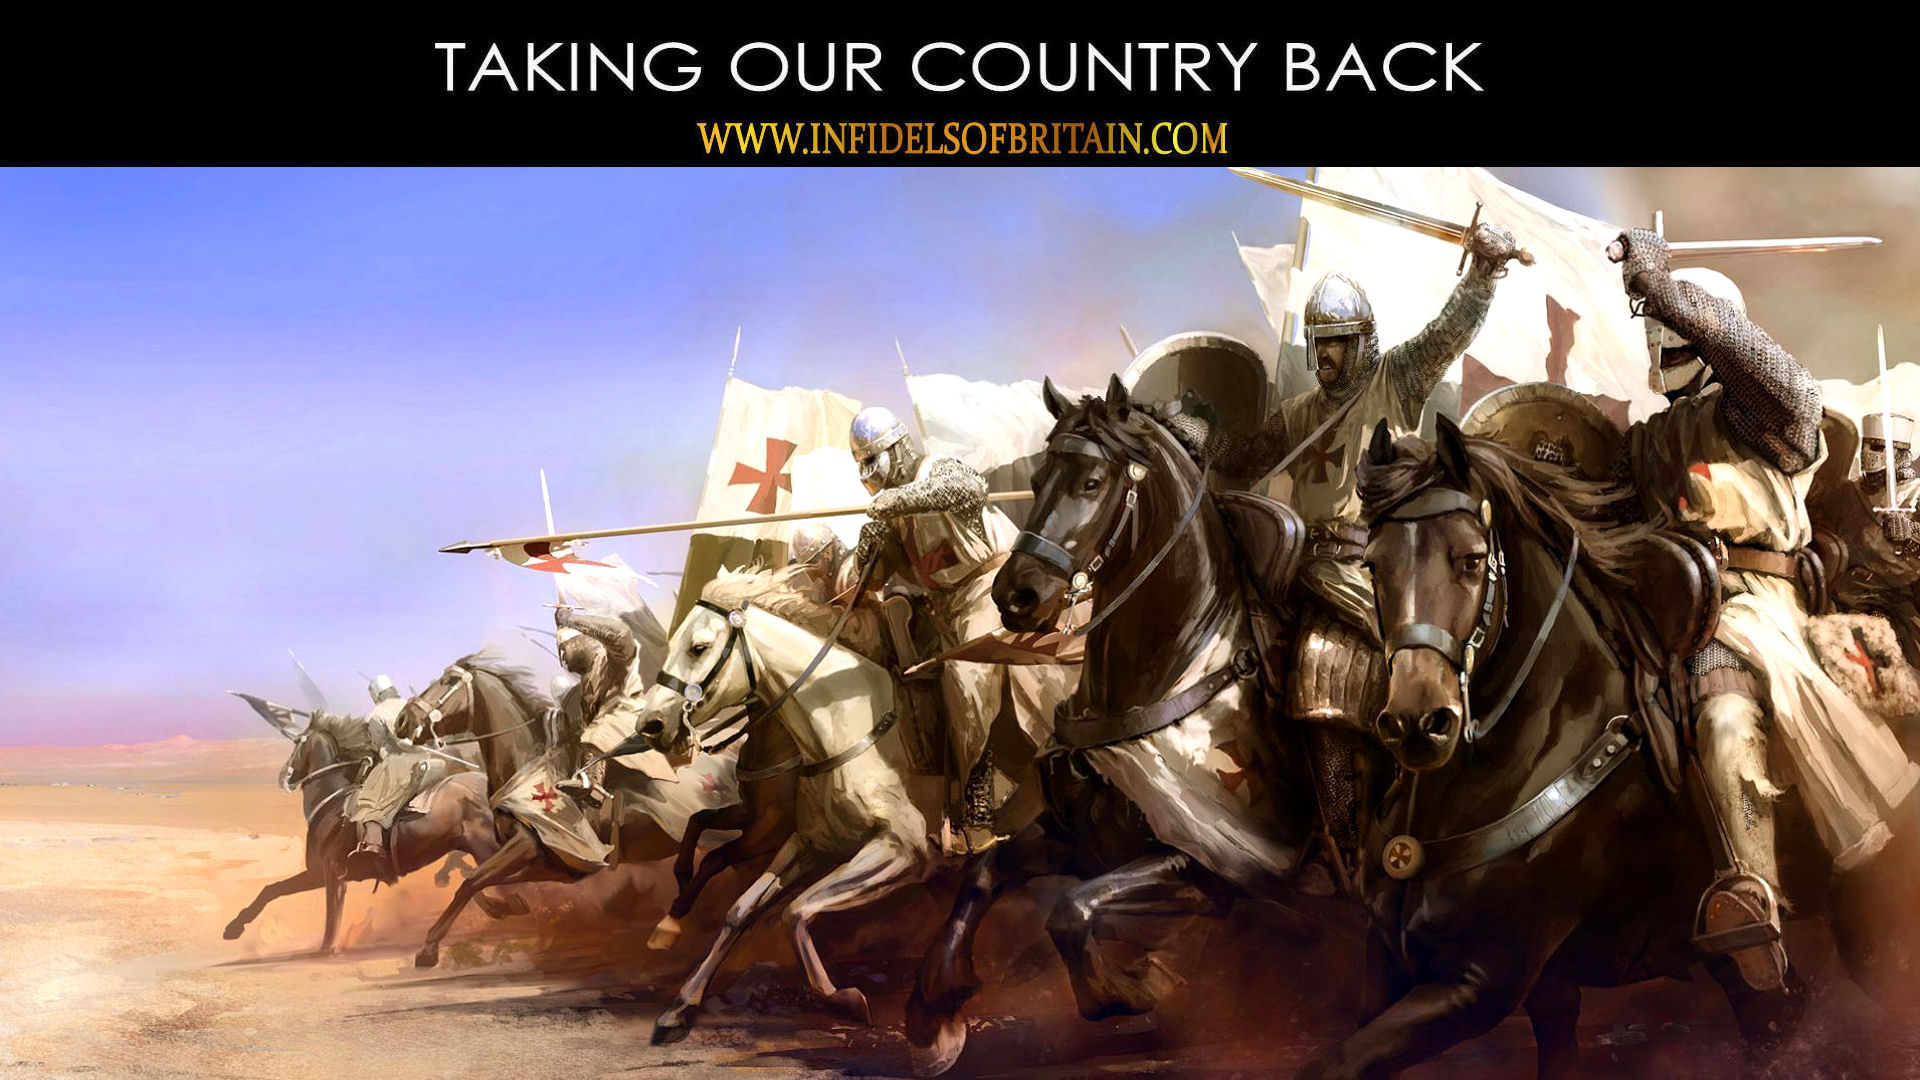 INFIDELS OF BRITAIN - TAKING OUR COUNTRY BACK!